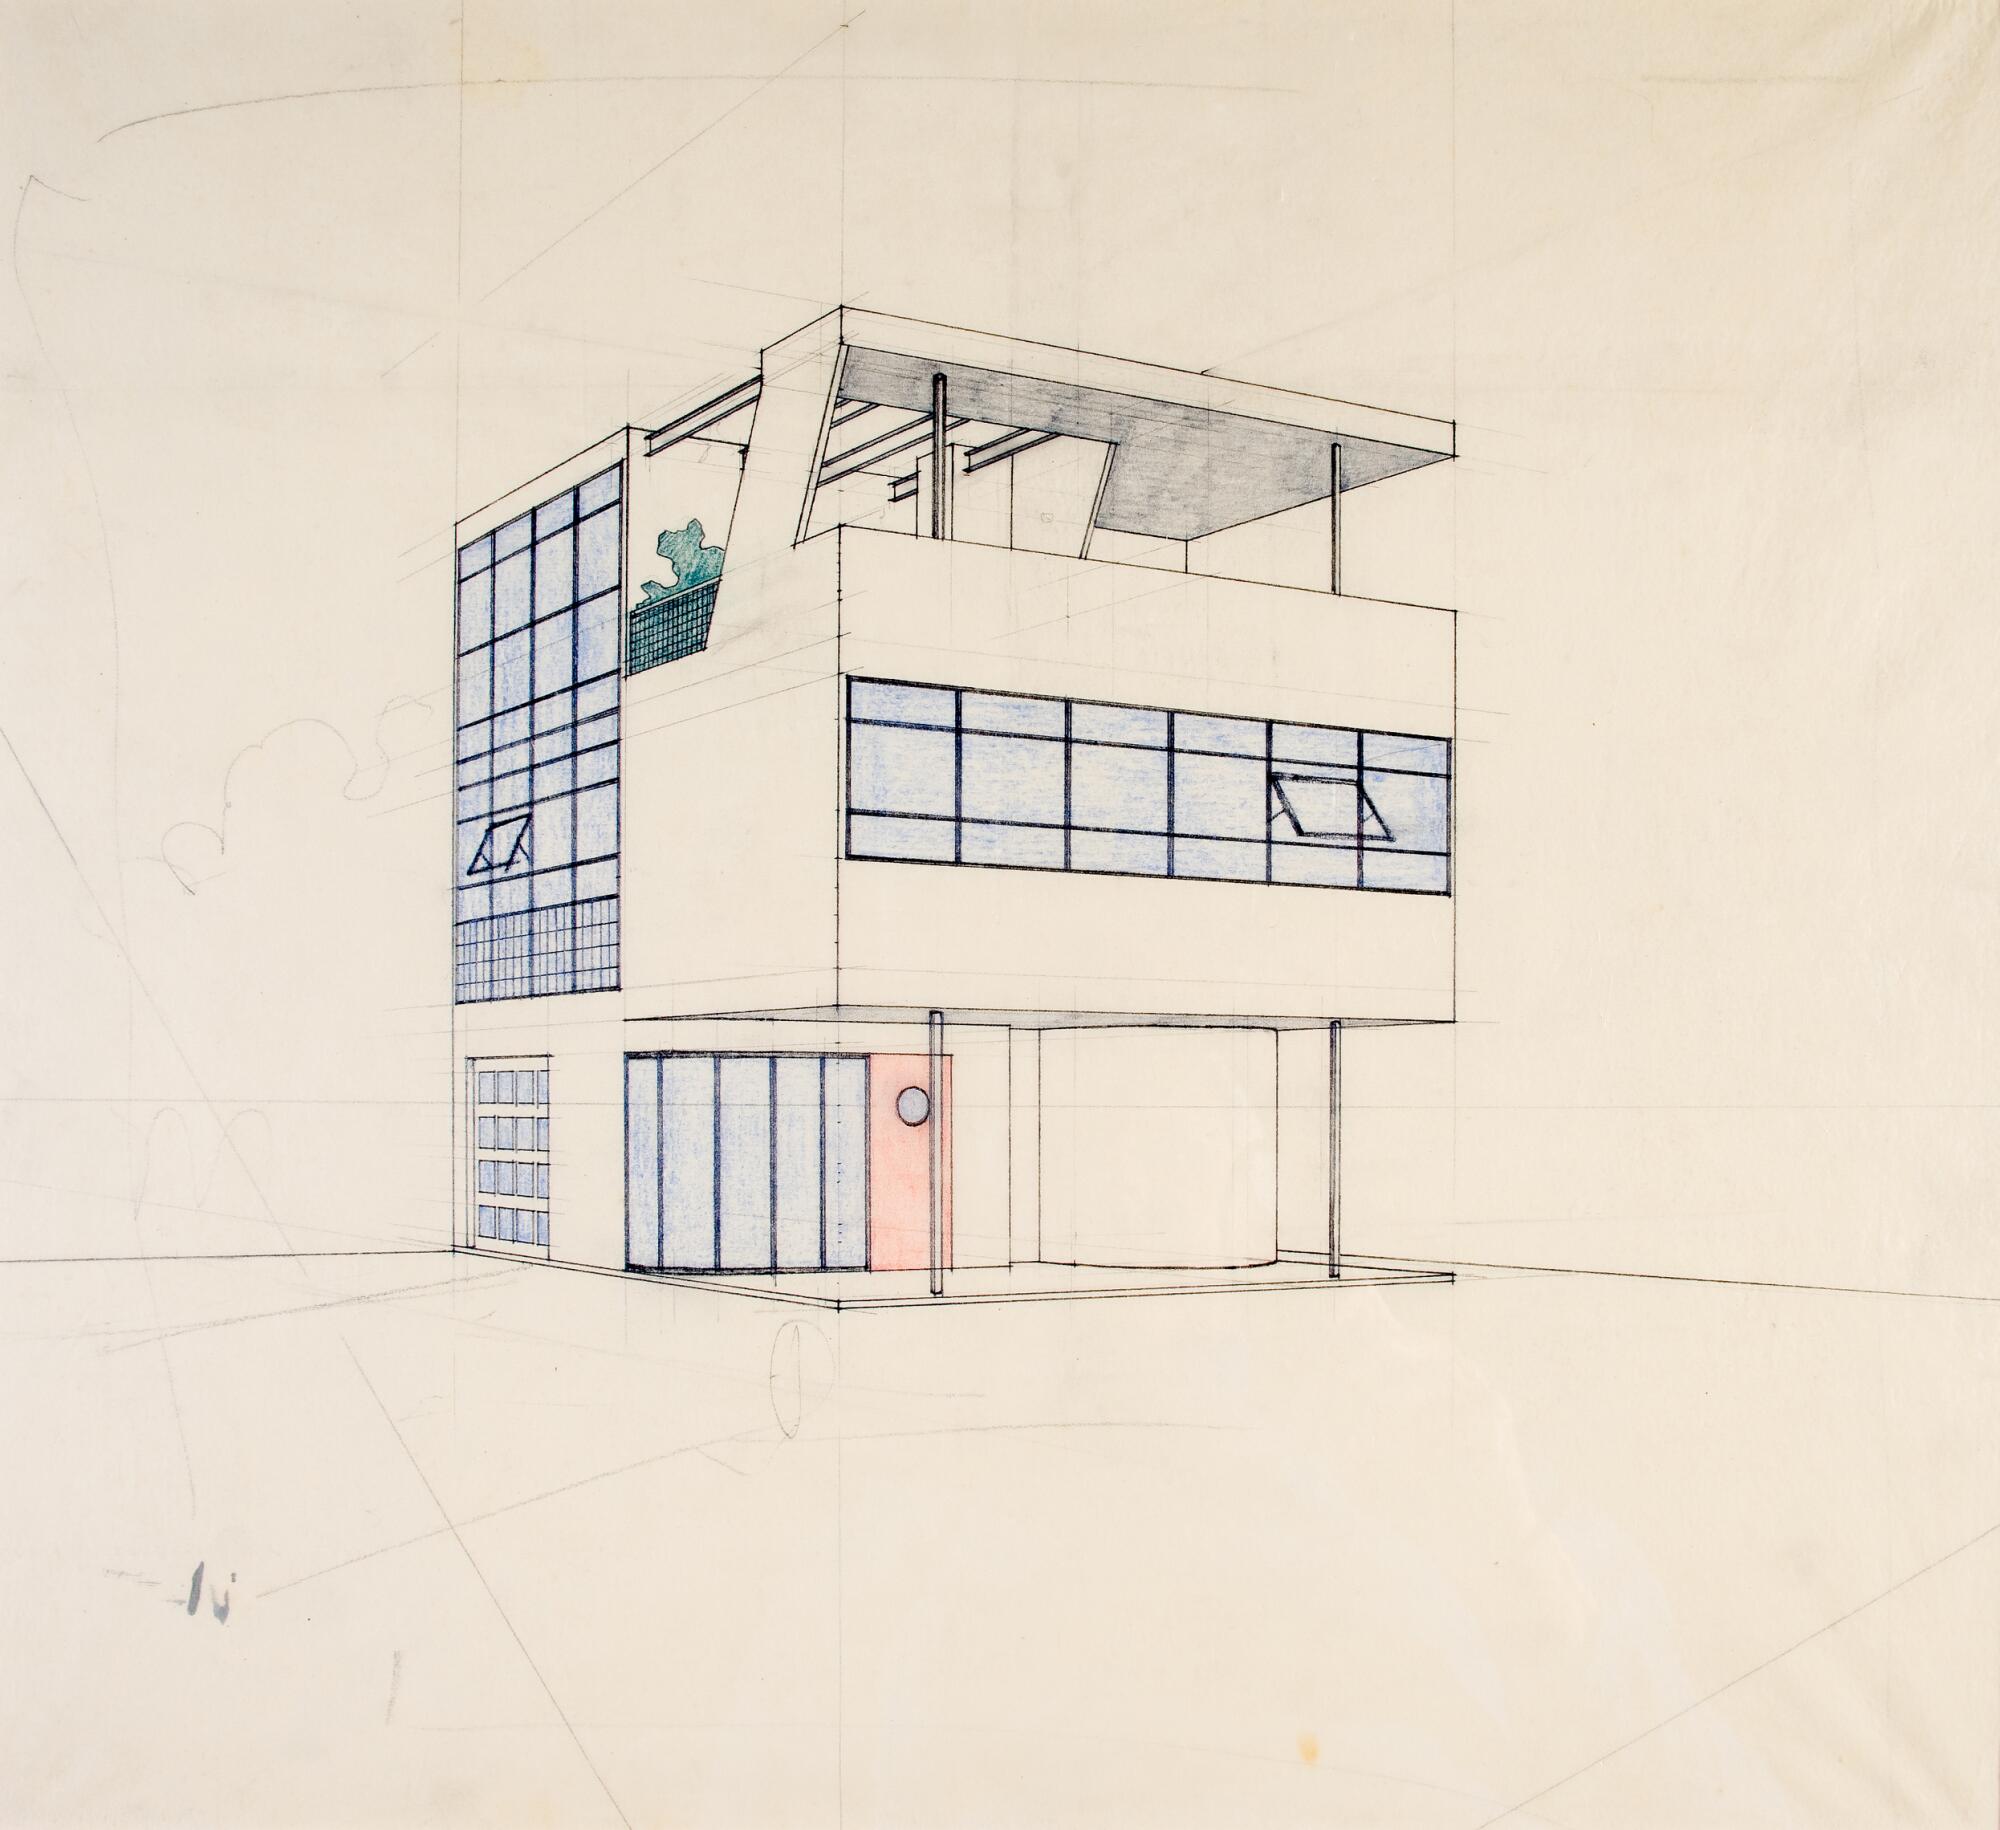 Architects: Kocher & Frey, Exterior Perspective Sketch of Aluminaire House.